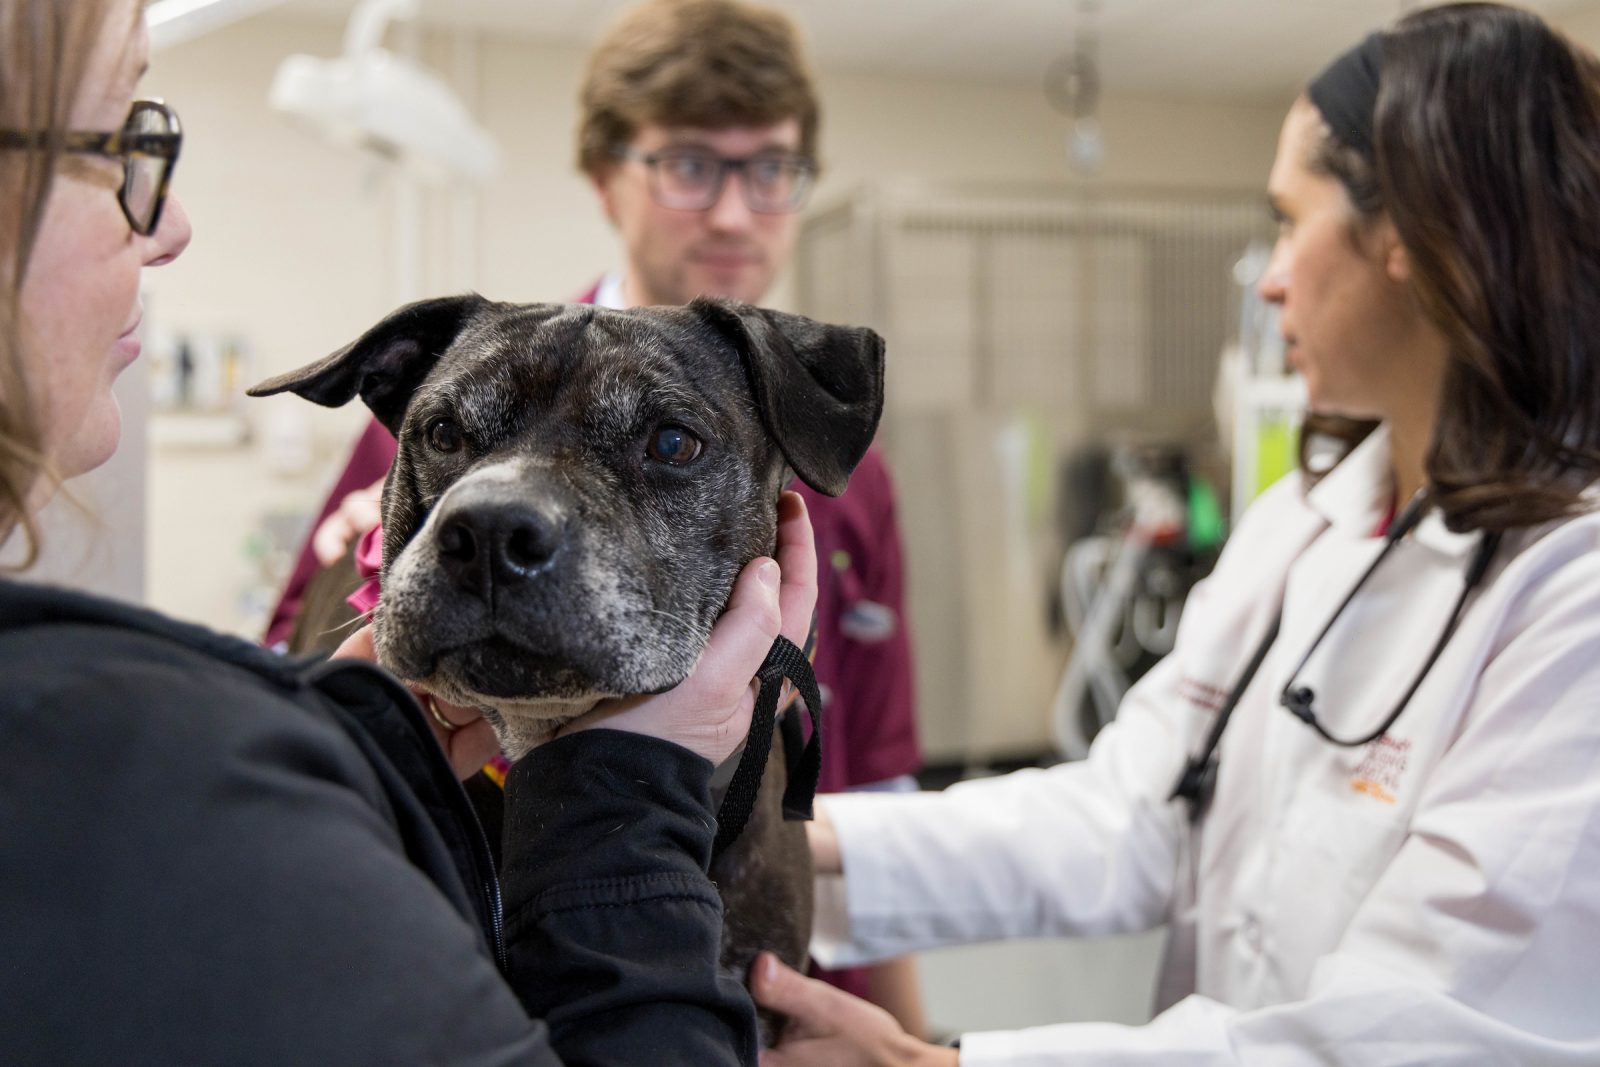 Revolutionary Urine Test Offers Early Cancer Detection for Dogs